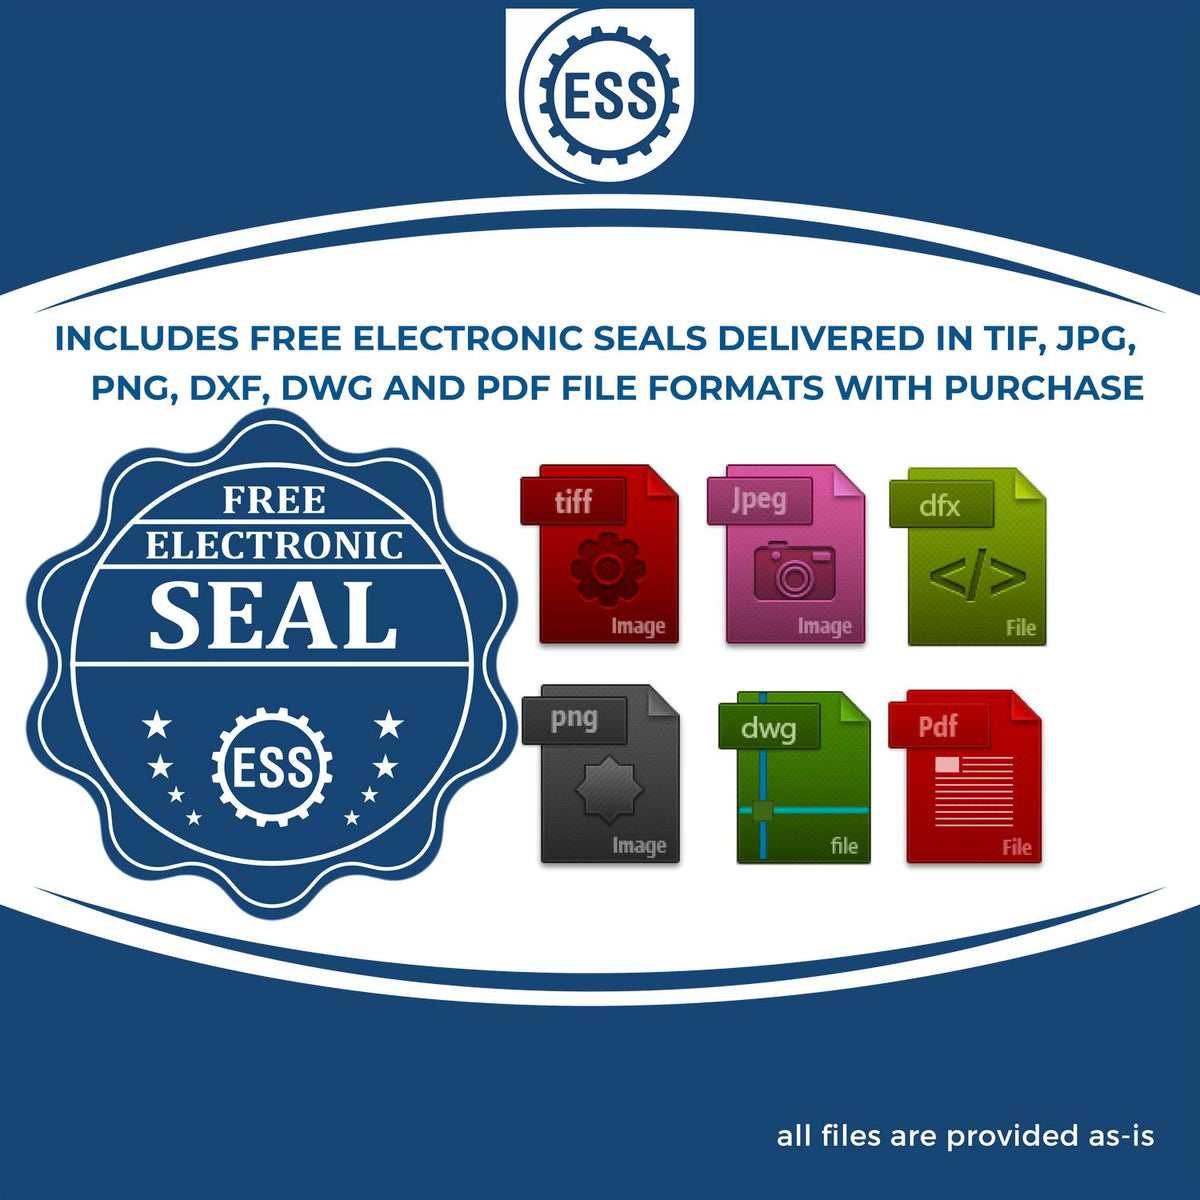 An infographic for the free electronic seal for the Heavy Duty Cast Iron Illinois Architect Embosser illustrating the different file type icons such as DXF, DWG, TIF, JPG and PNG.